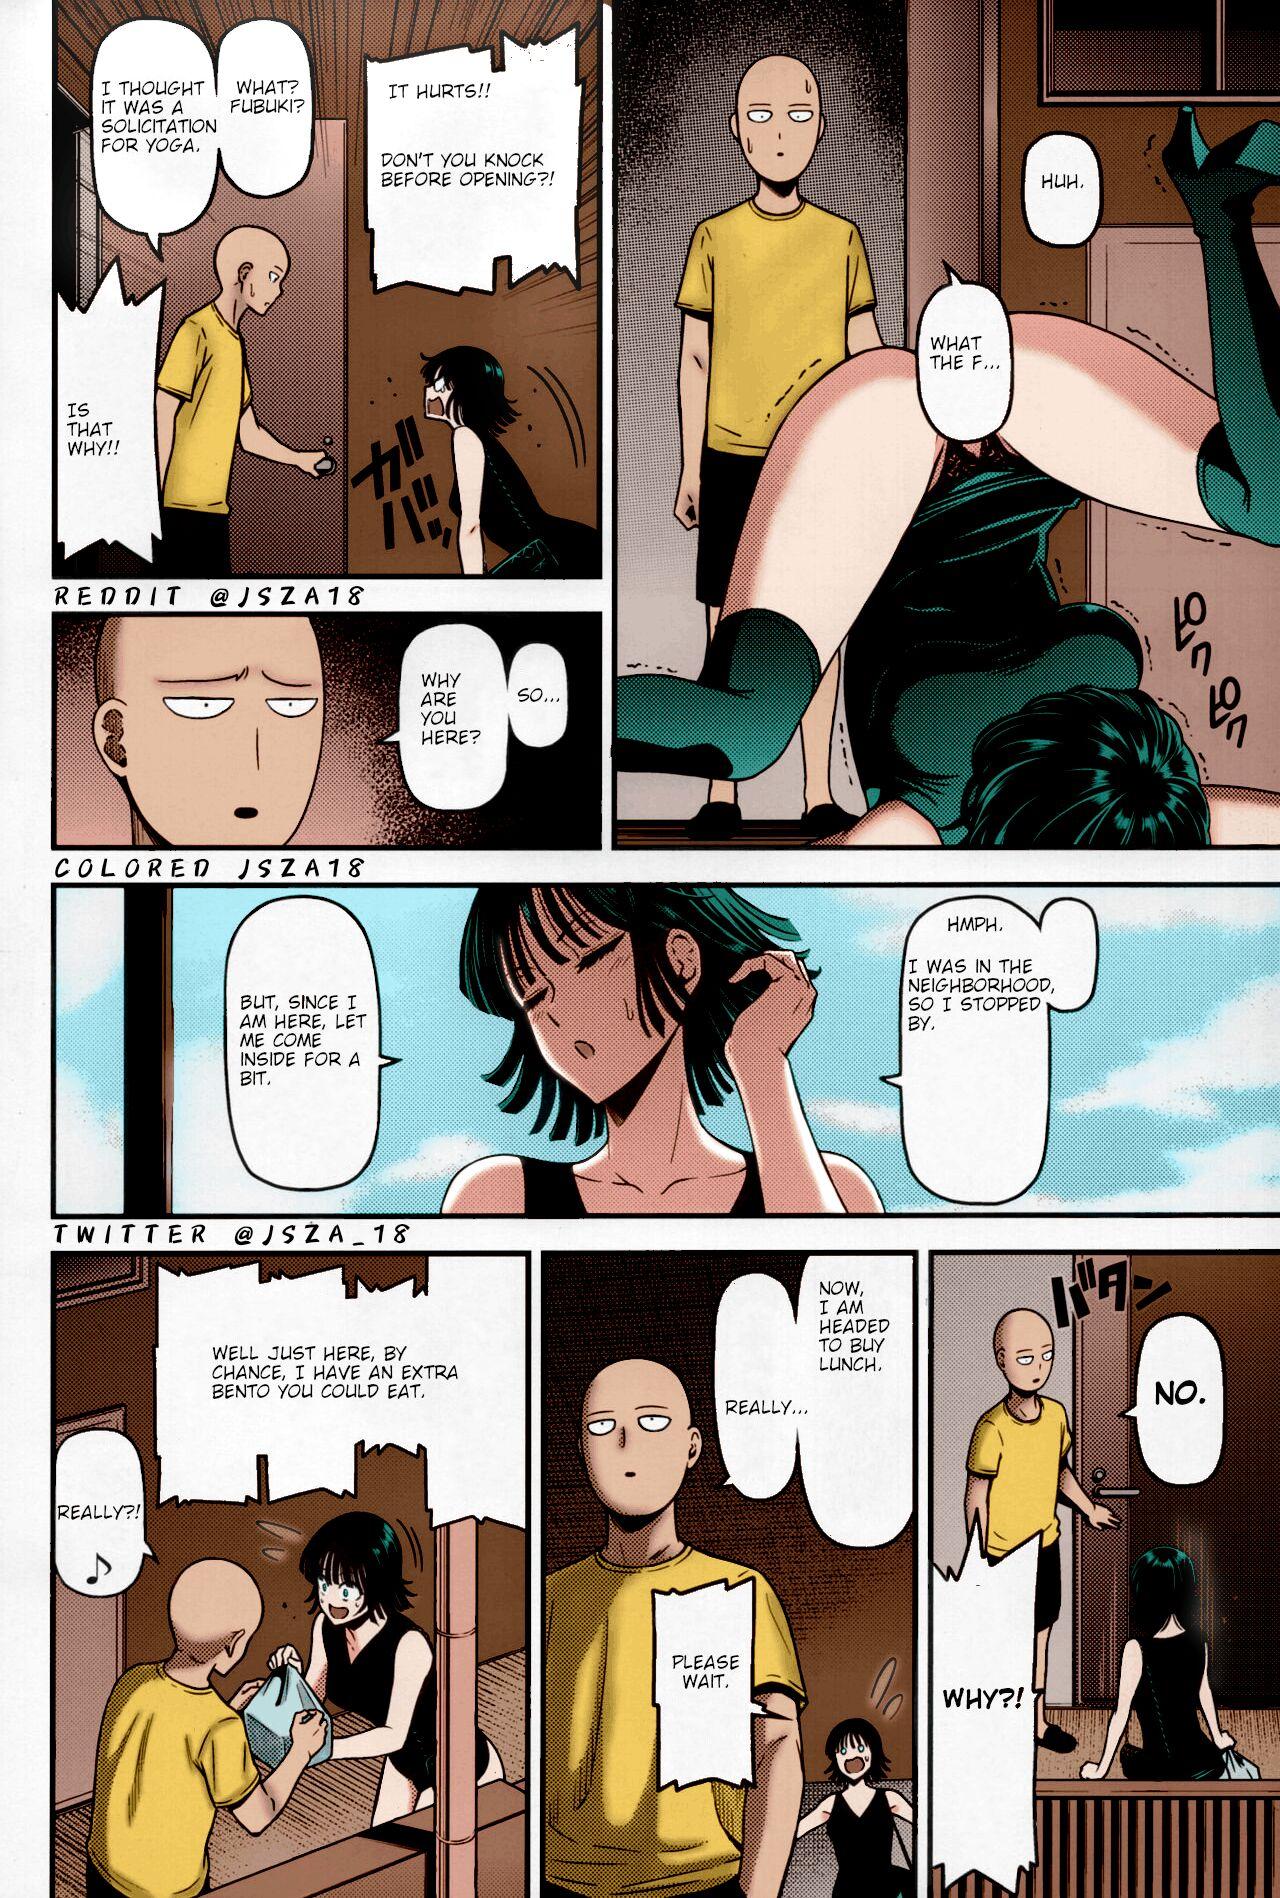 Swallowing ONE-HURRICANE 6 - One punch man Fisting - Page 3